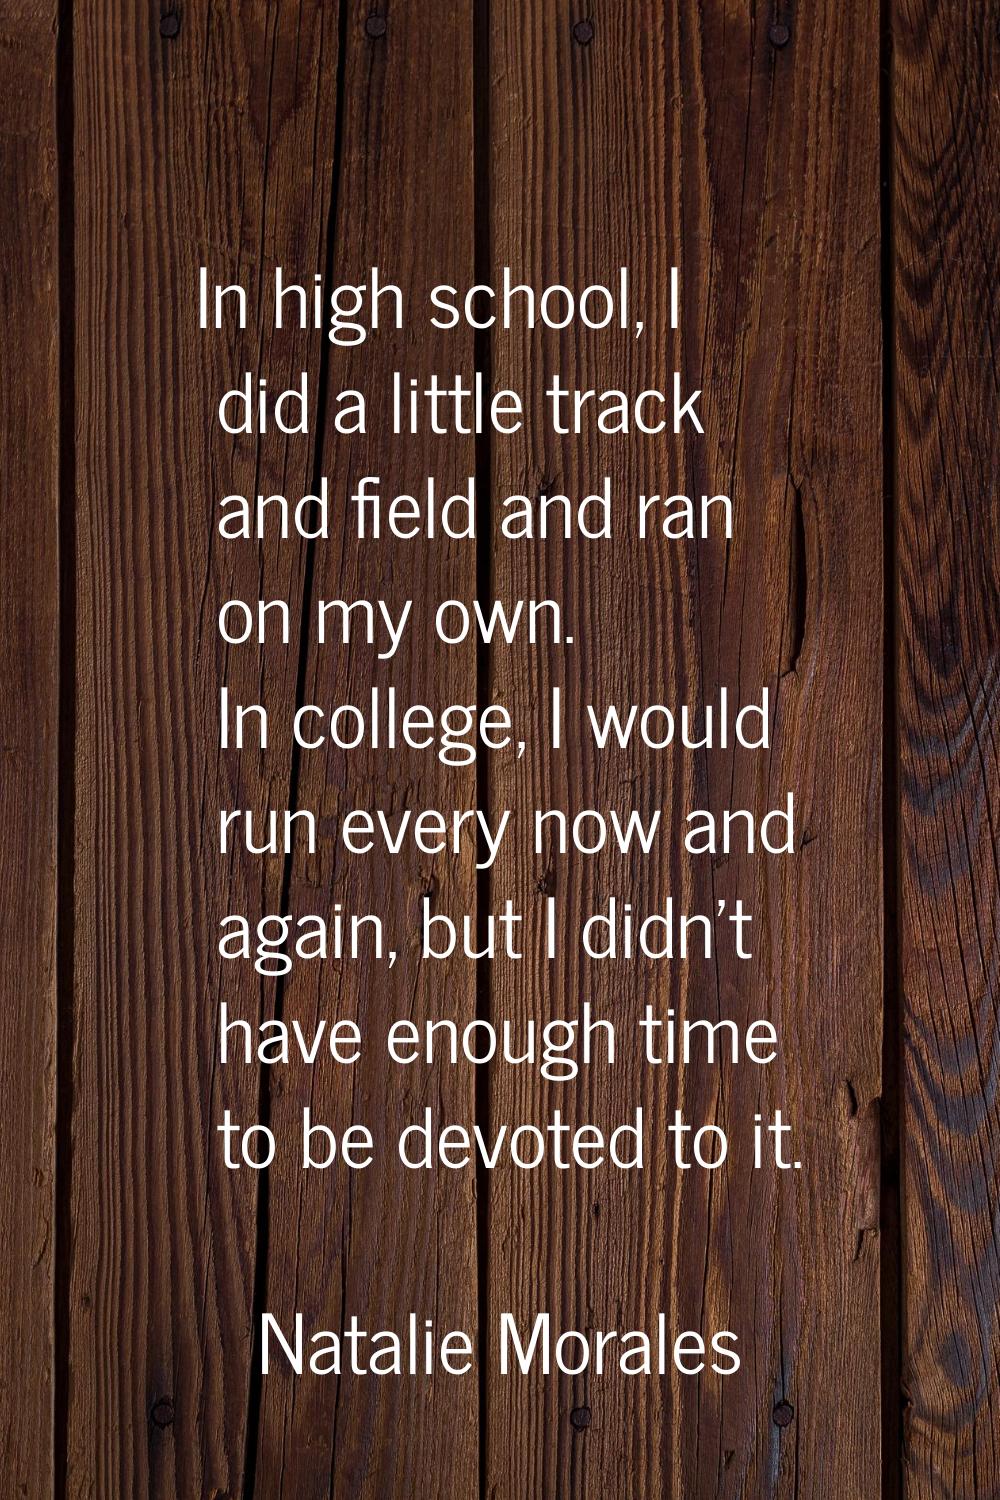 In high school, I did a little track and field and ran on my own. In college, I would run every now